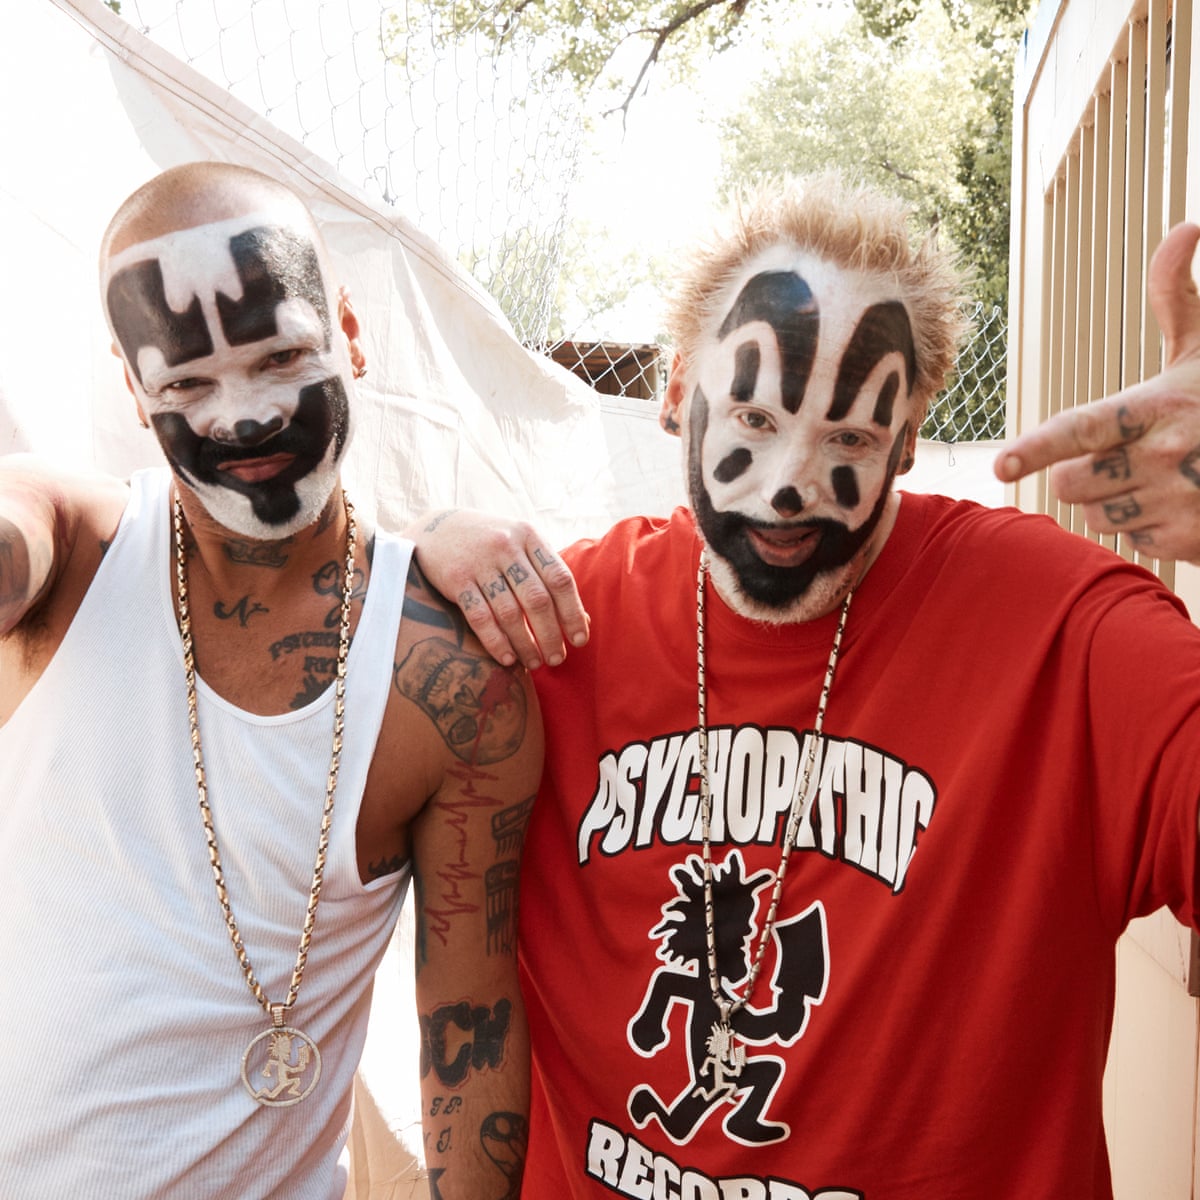 Are These Clowns Really Gang Members Juggalos Protest Fbi S Label